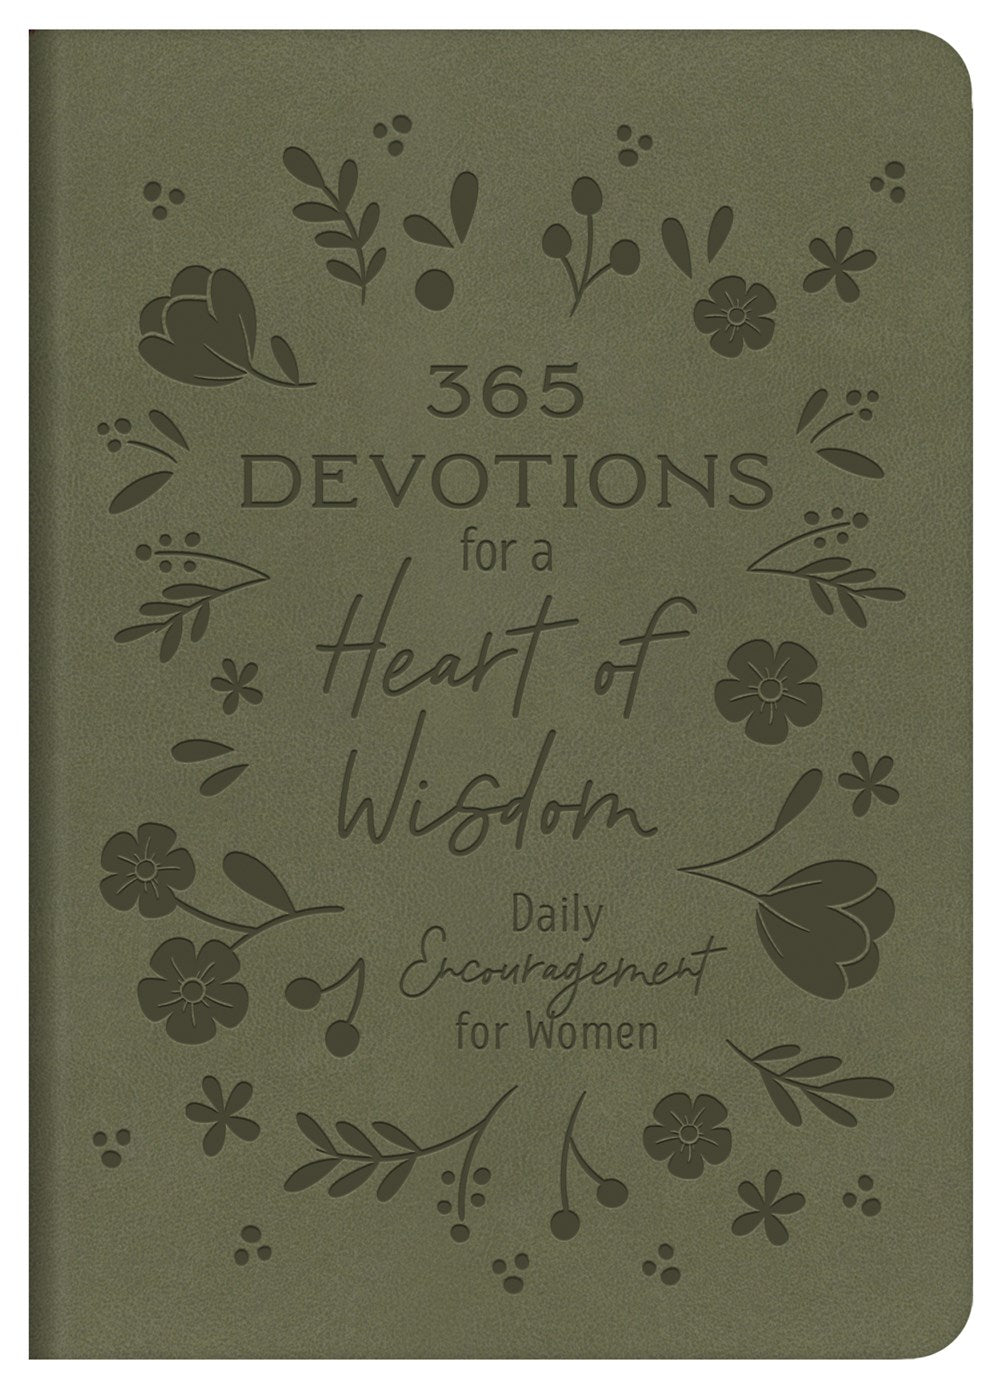 365 Devotions for a Heart of Wisdom - The Christian Gift Company